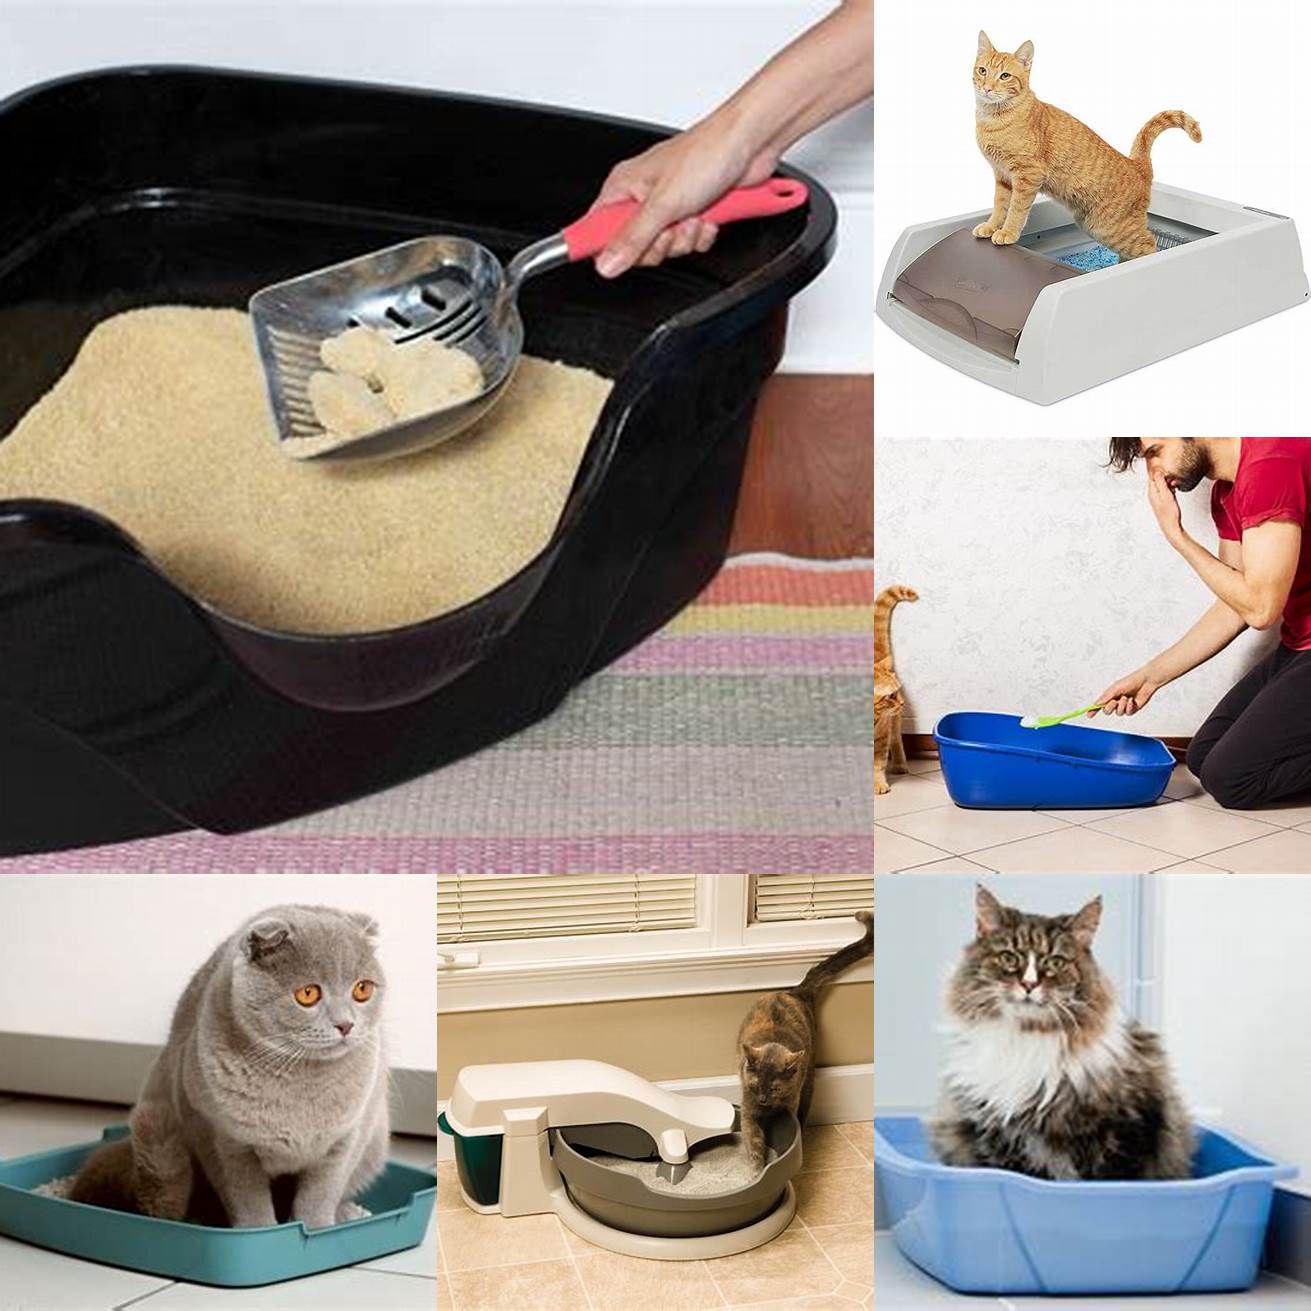 Keep your cats litter box clean and disinfected